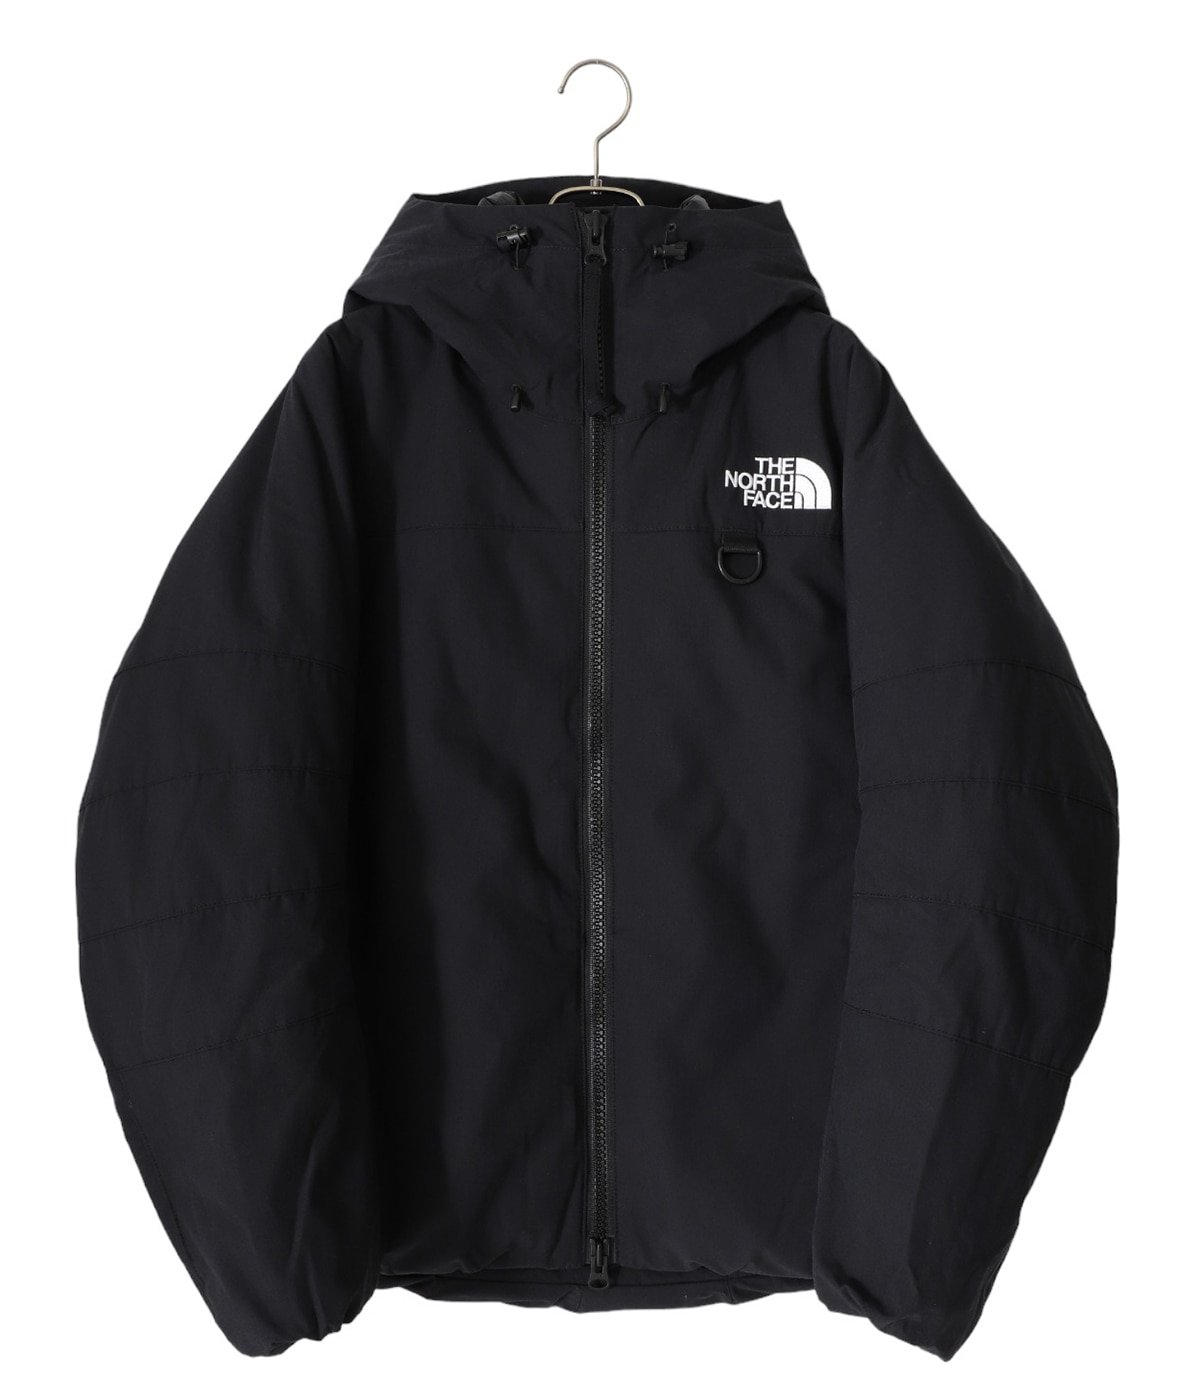 Firefly Insulated Parka | THE NORTH FACE(ザ ノースフェイス